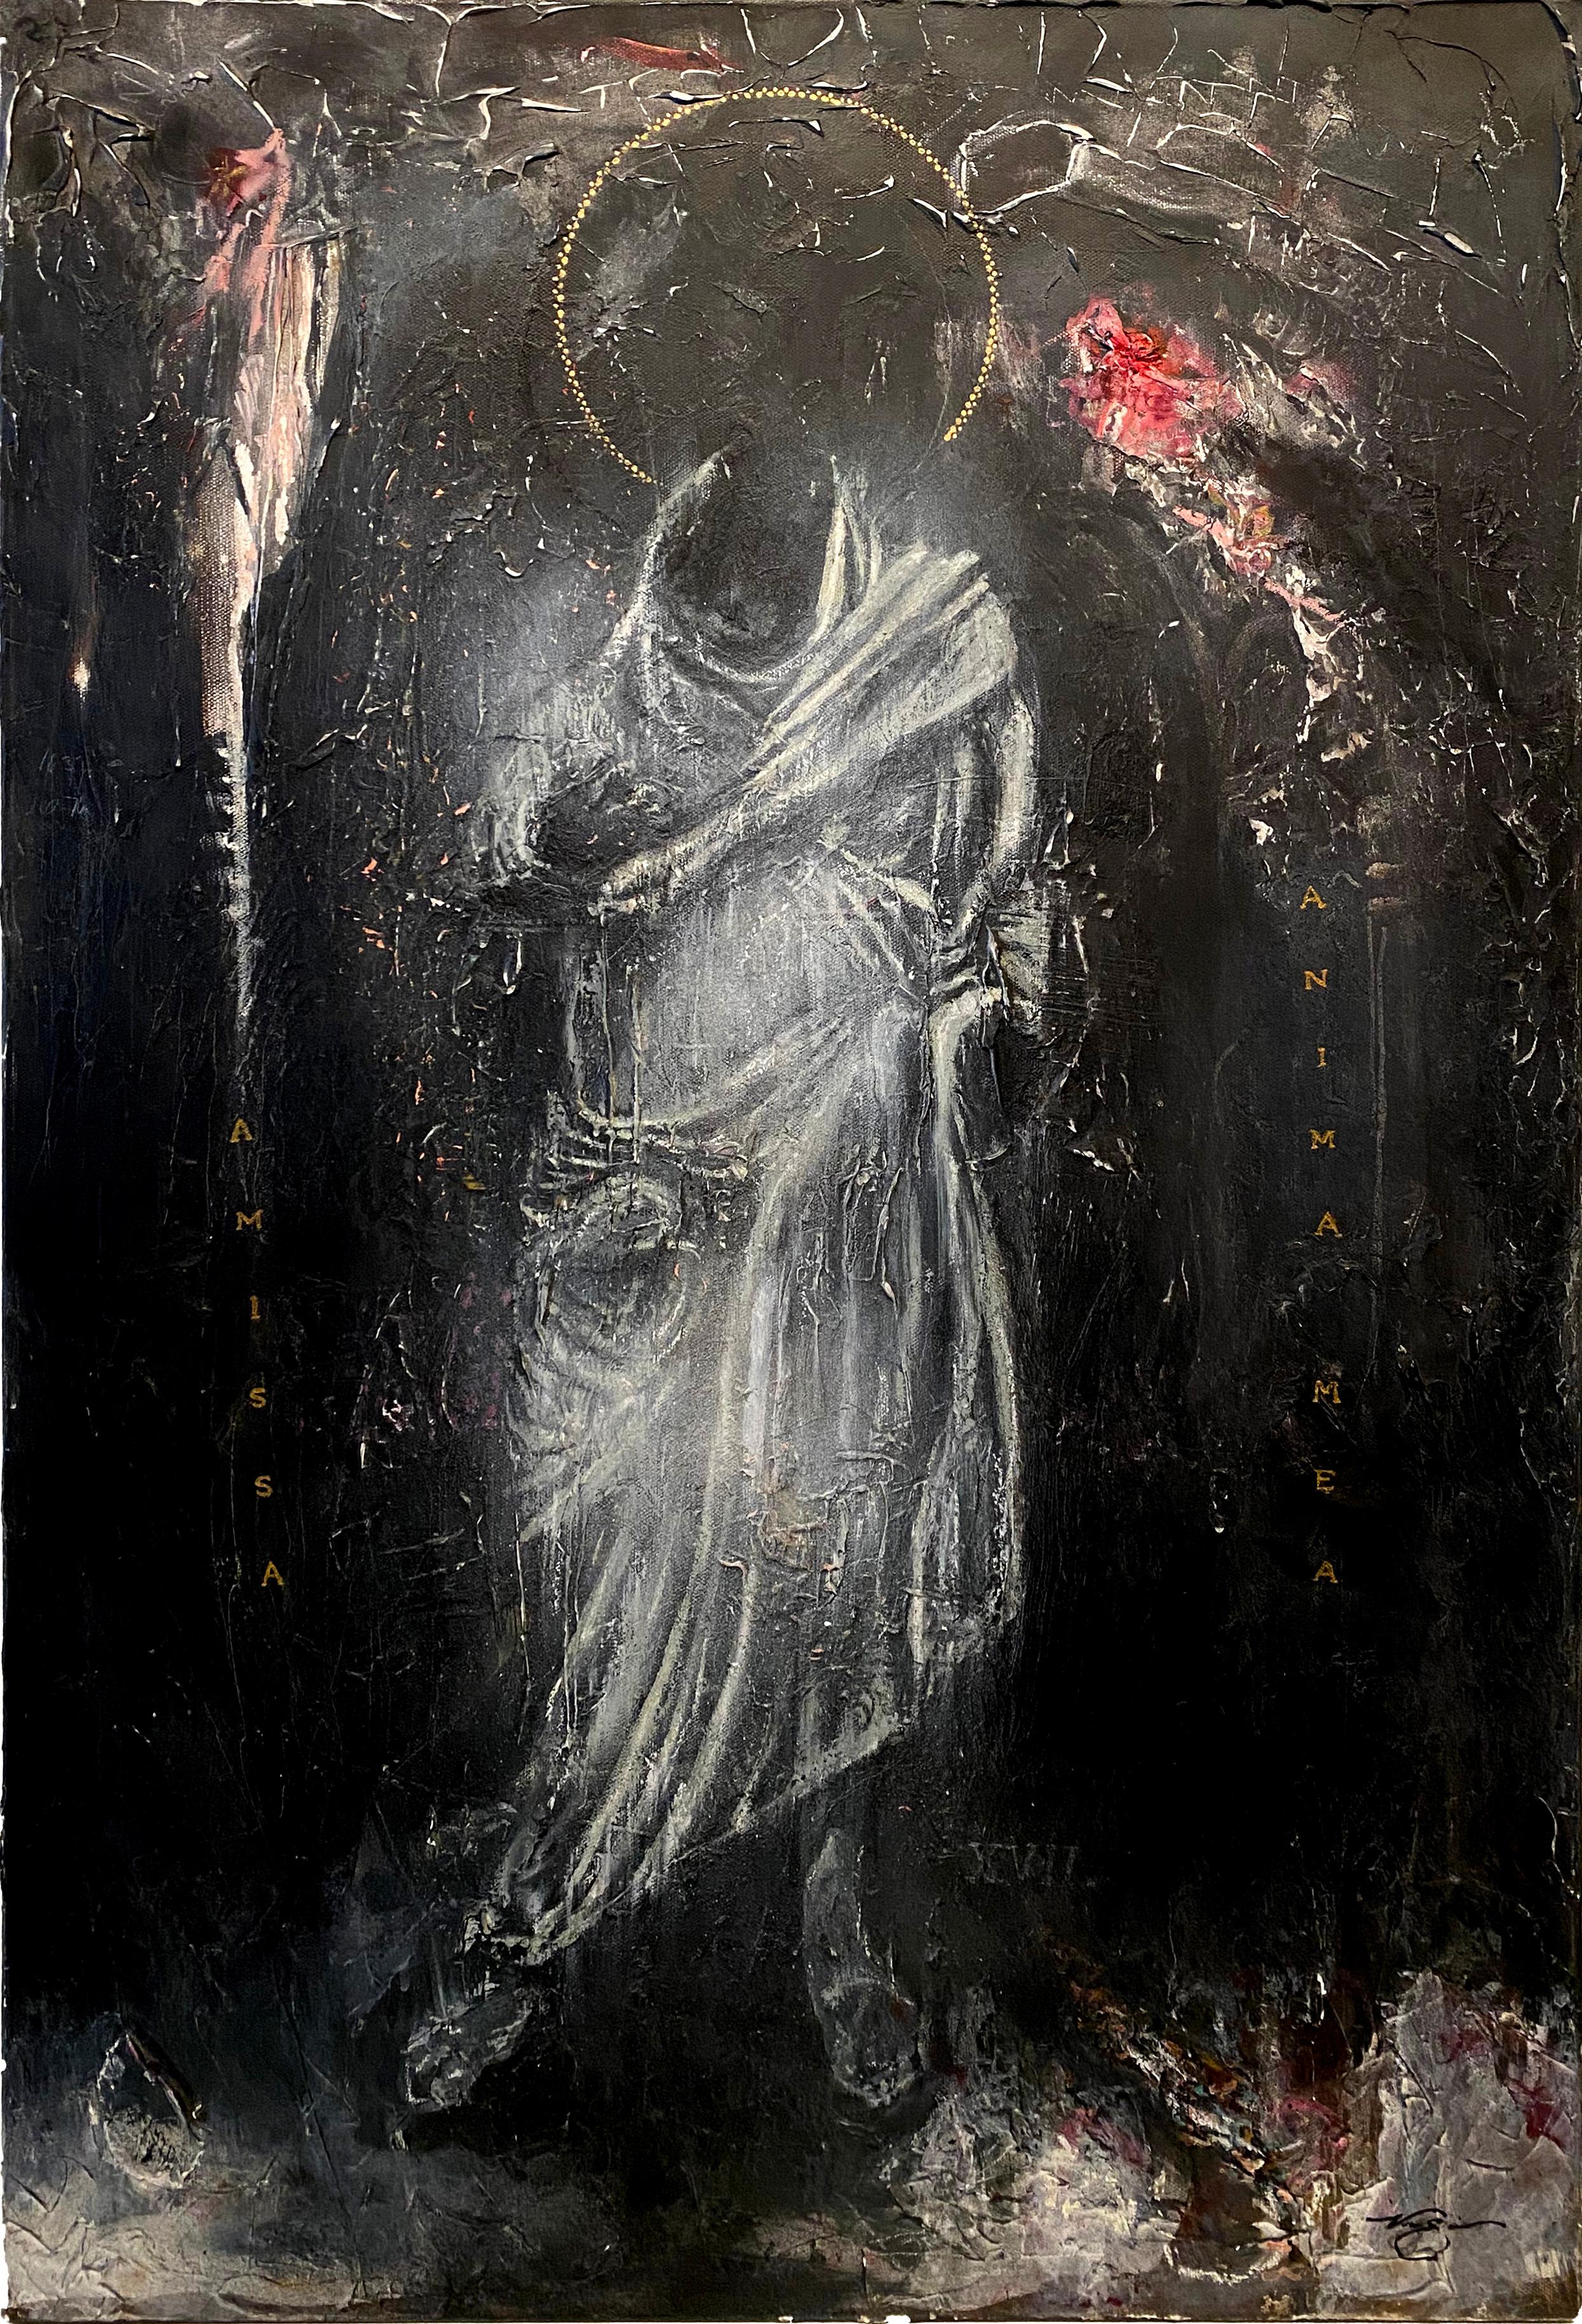 Figurative Painting Nicholas Evans - Spectre (Contemporary, Cerebral, Figurative, Black Canvas Painting with Type) 